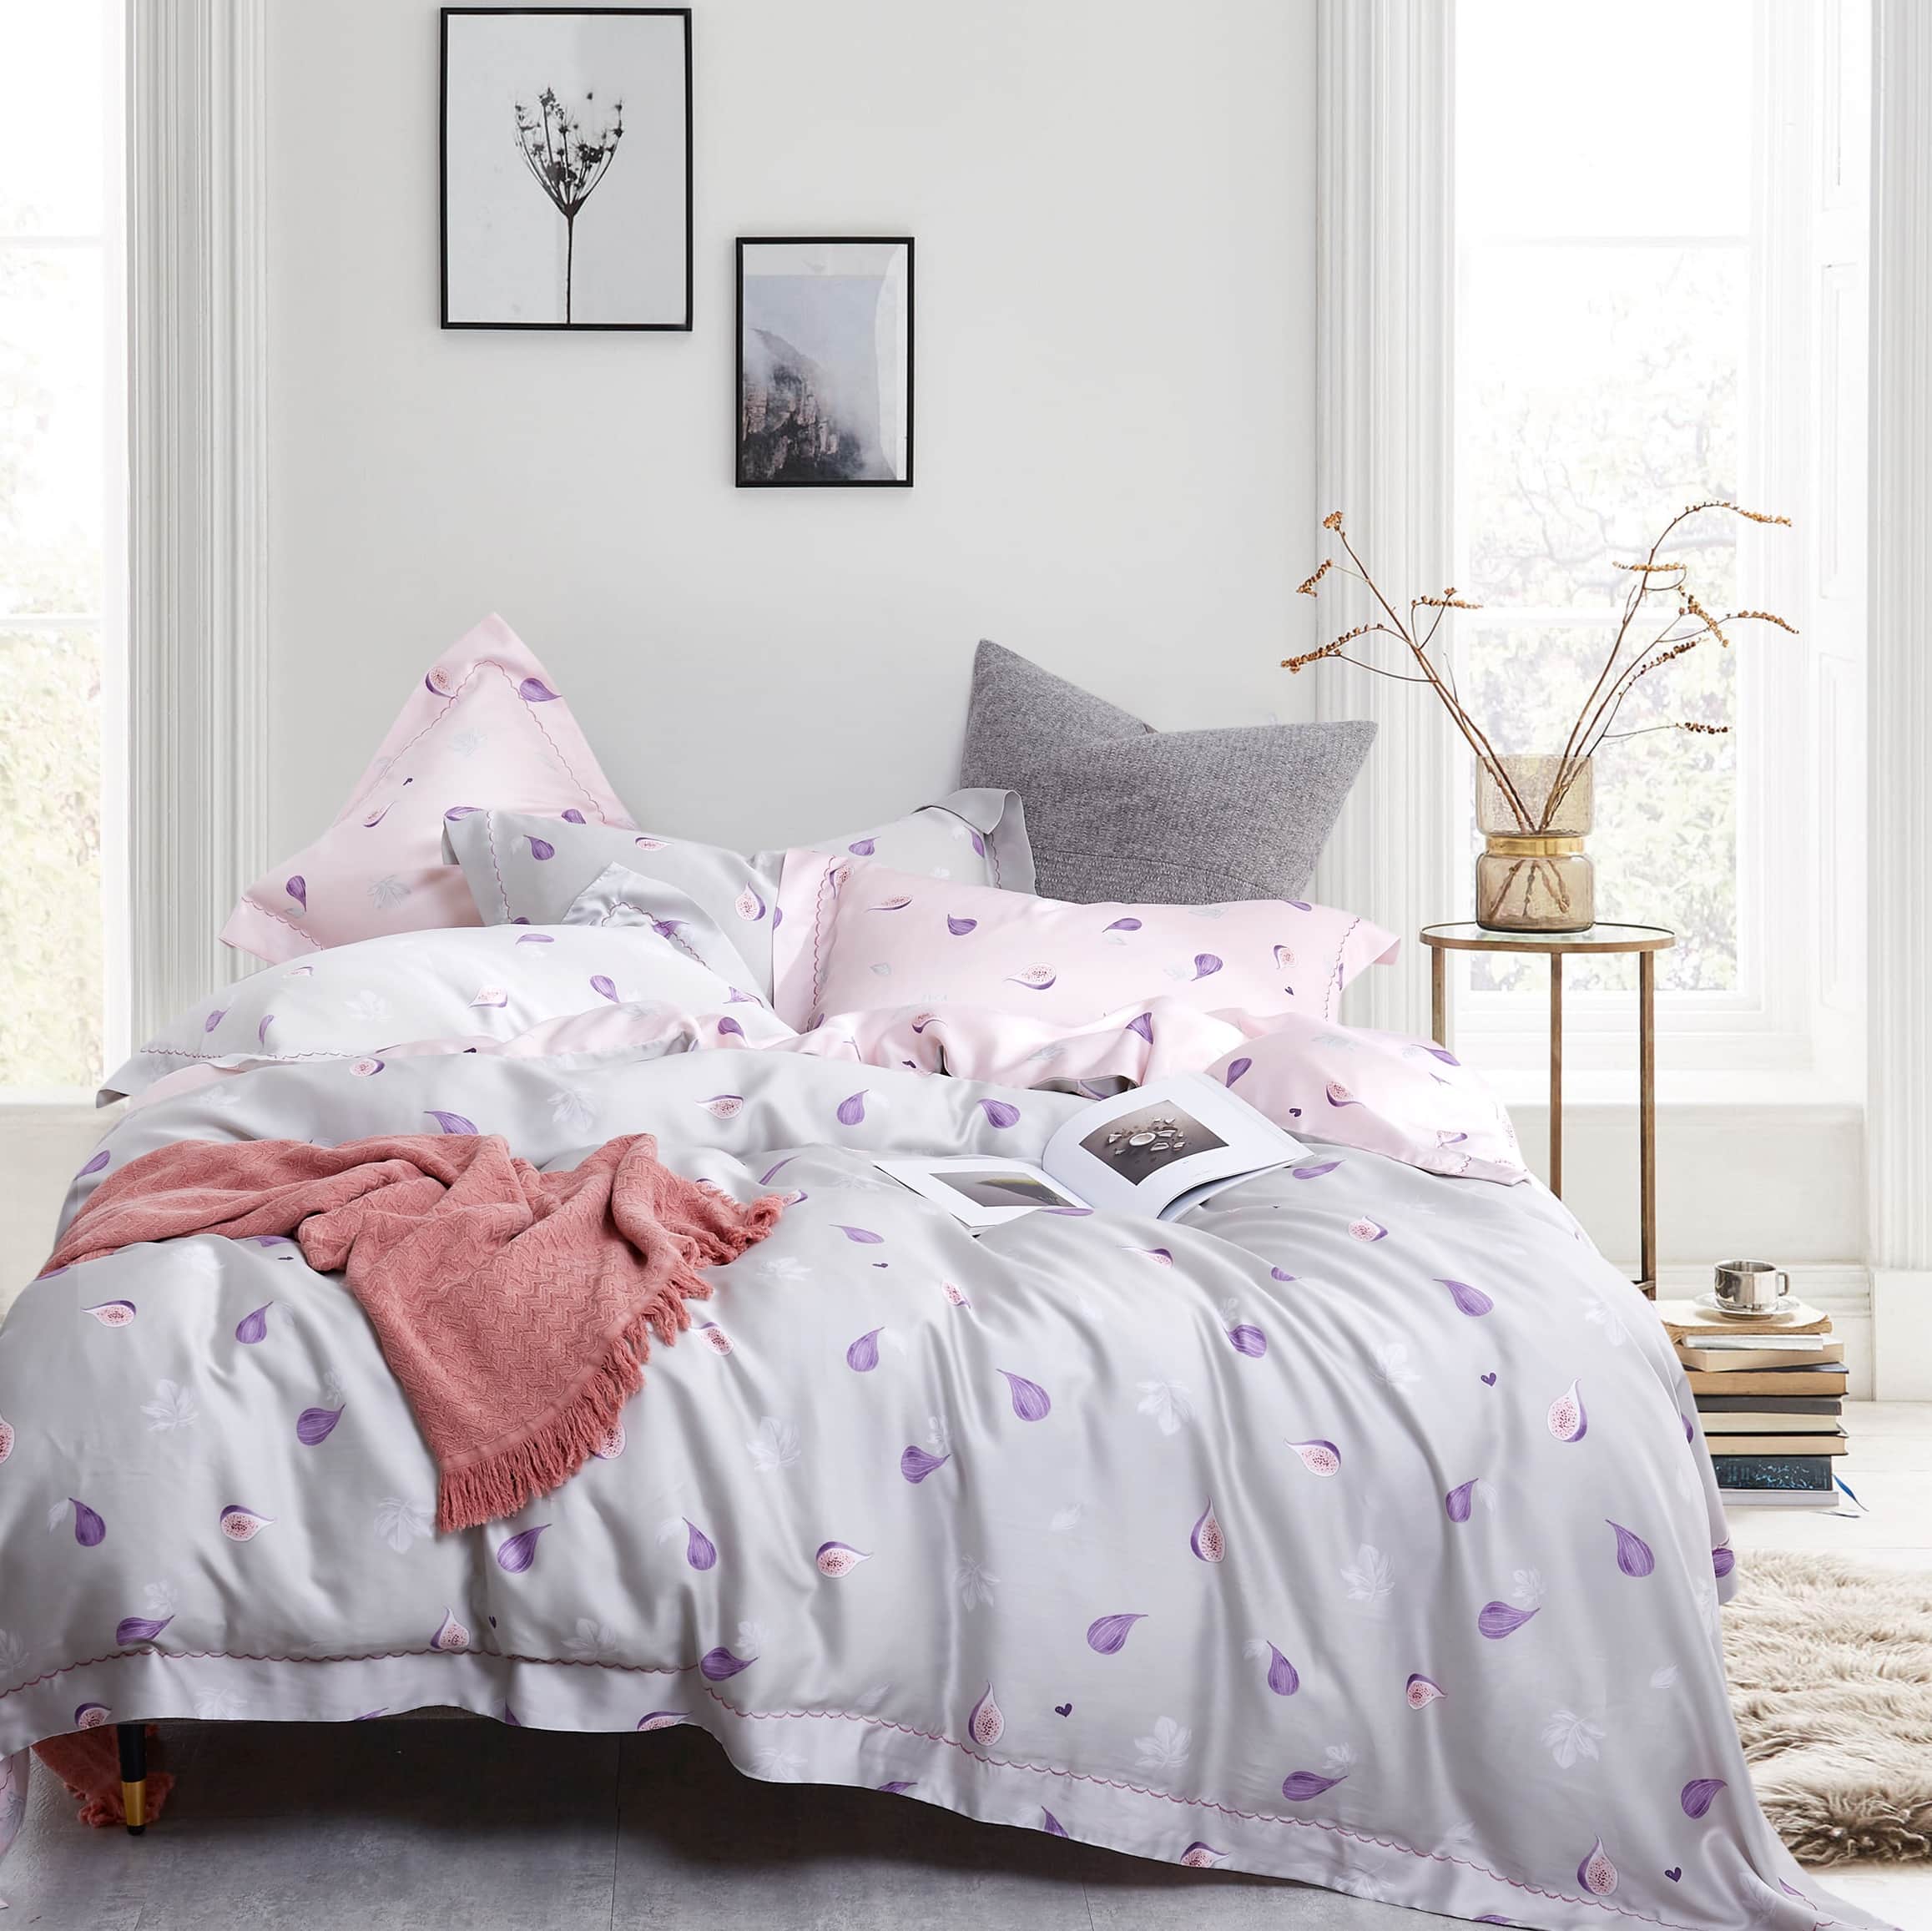 Western Luxury Jacquard 100% Tencel Lyocell Bedding Sets Collections